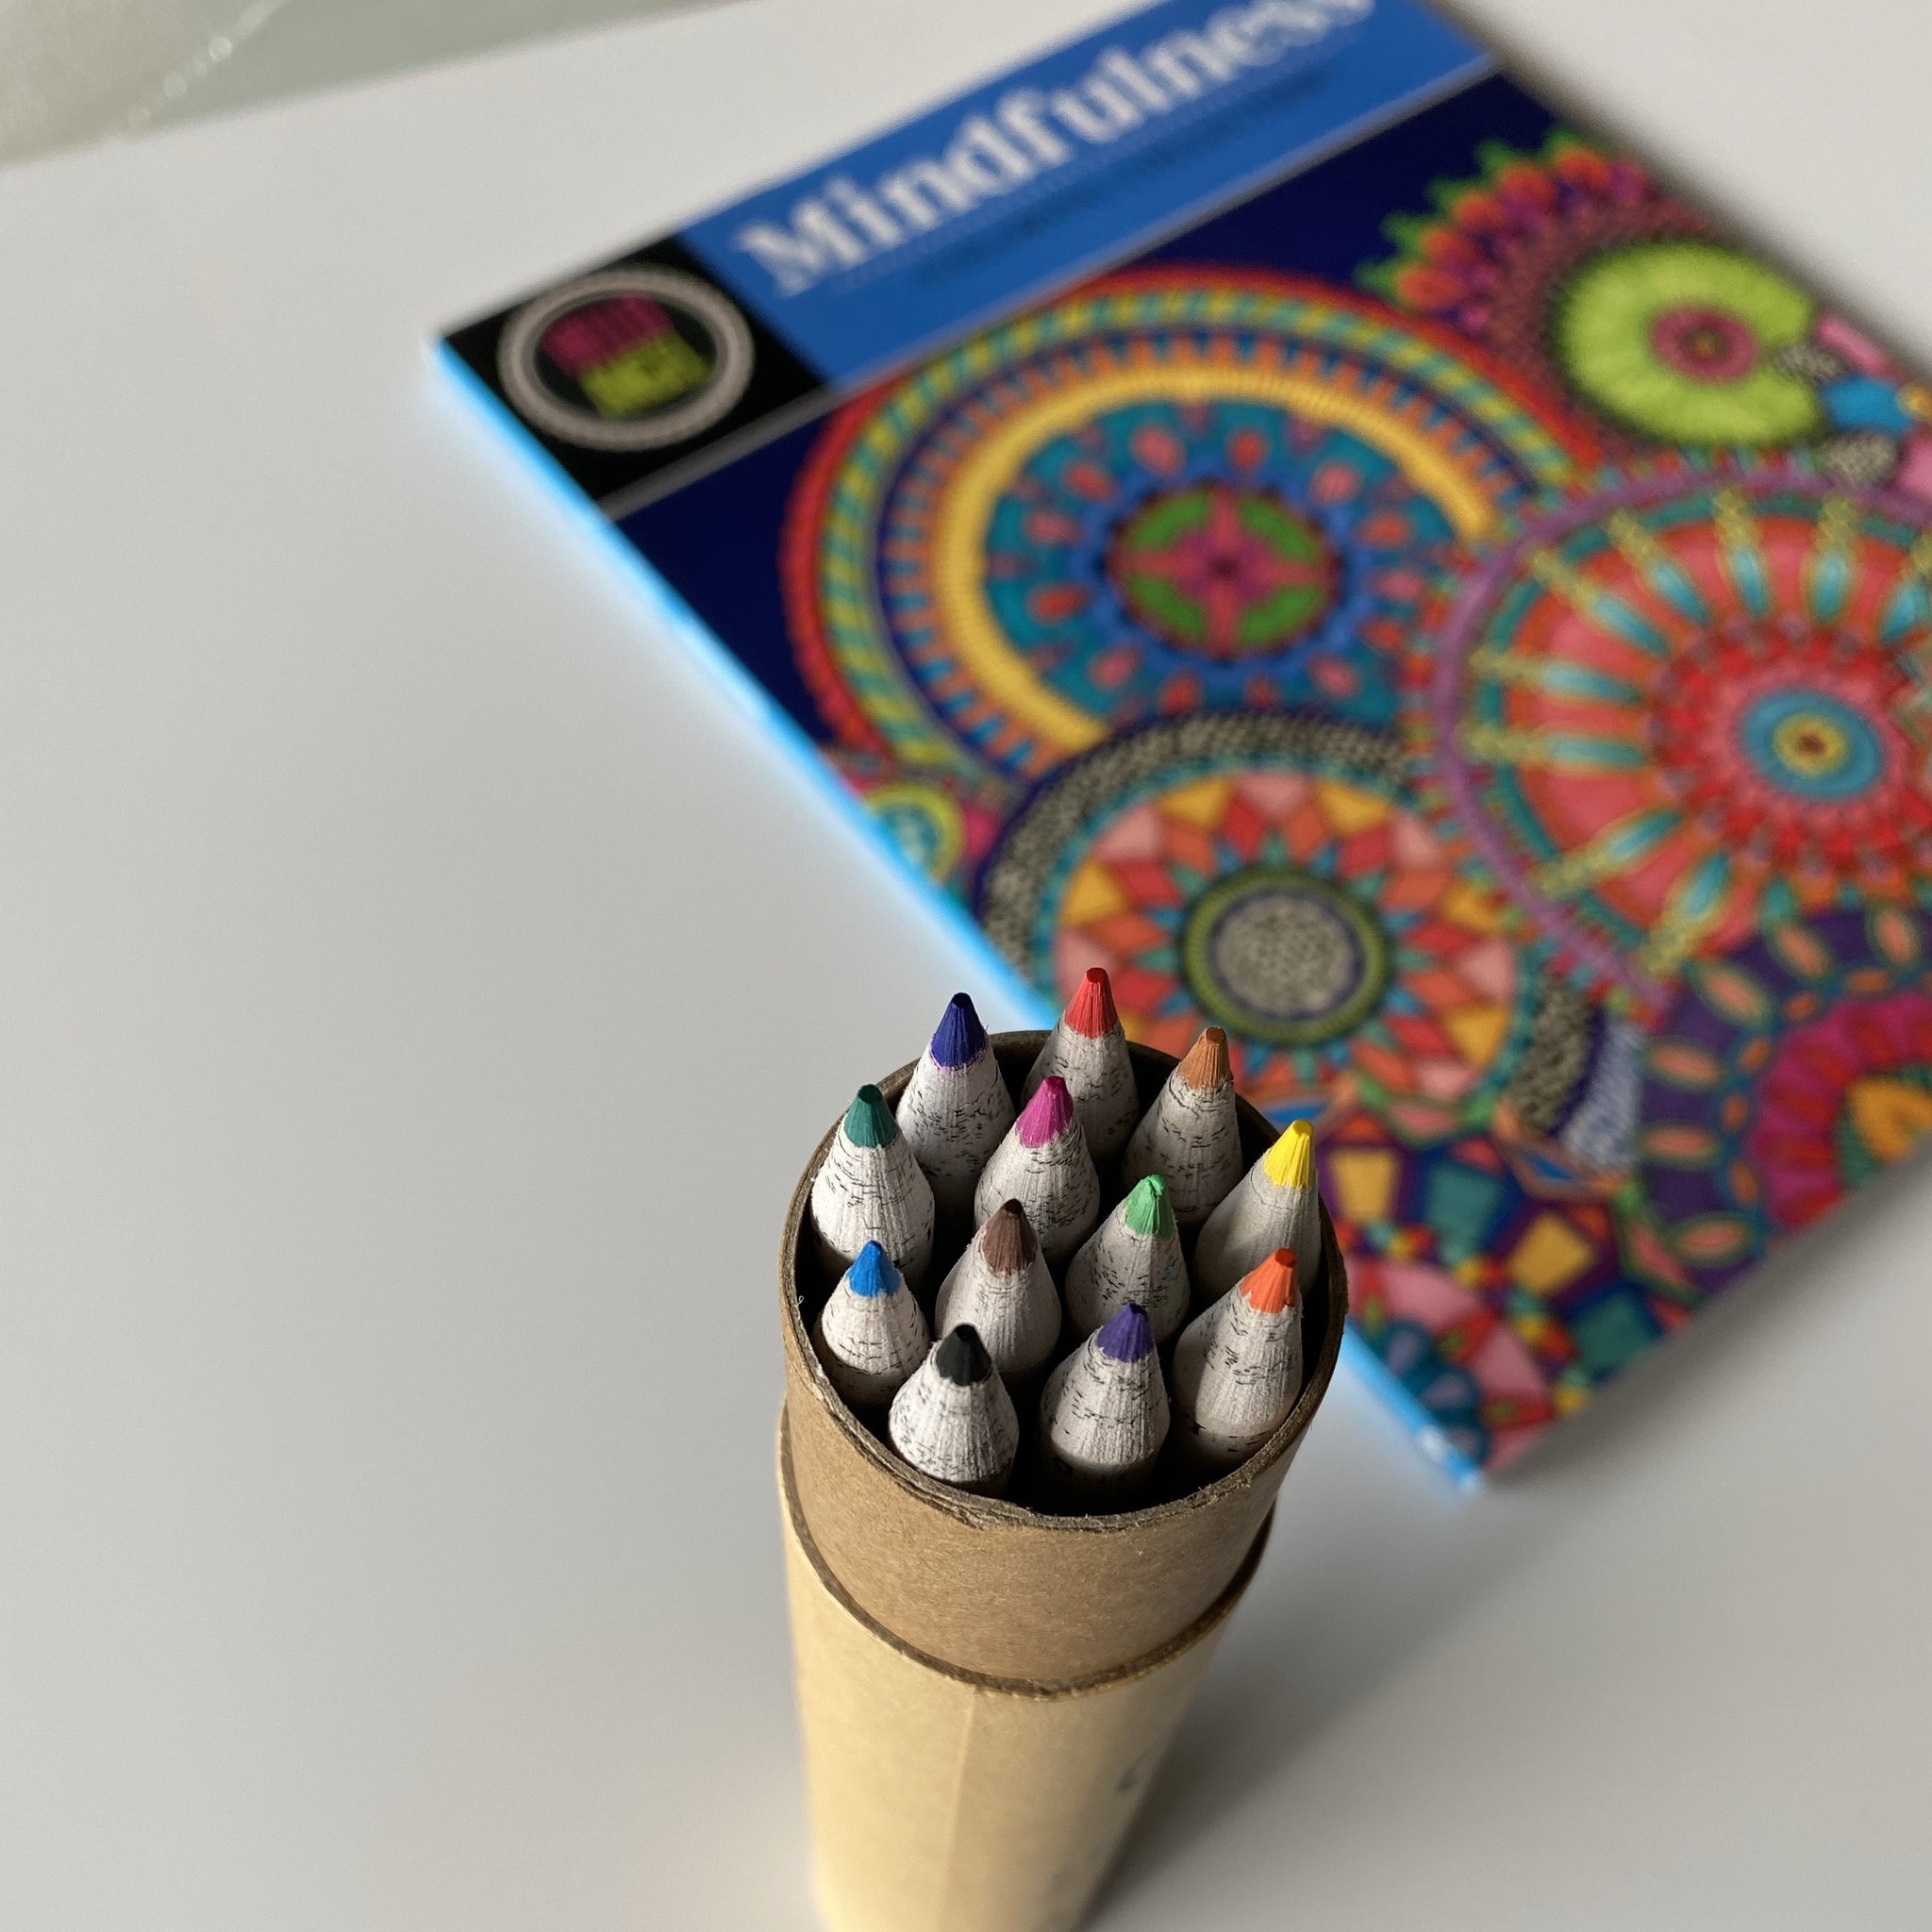 Best Markers for Coloring Books and Pages (2023)  Mindfulness colouring, Coloring  books, Gel pens coloring